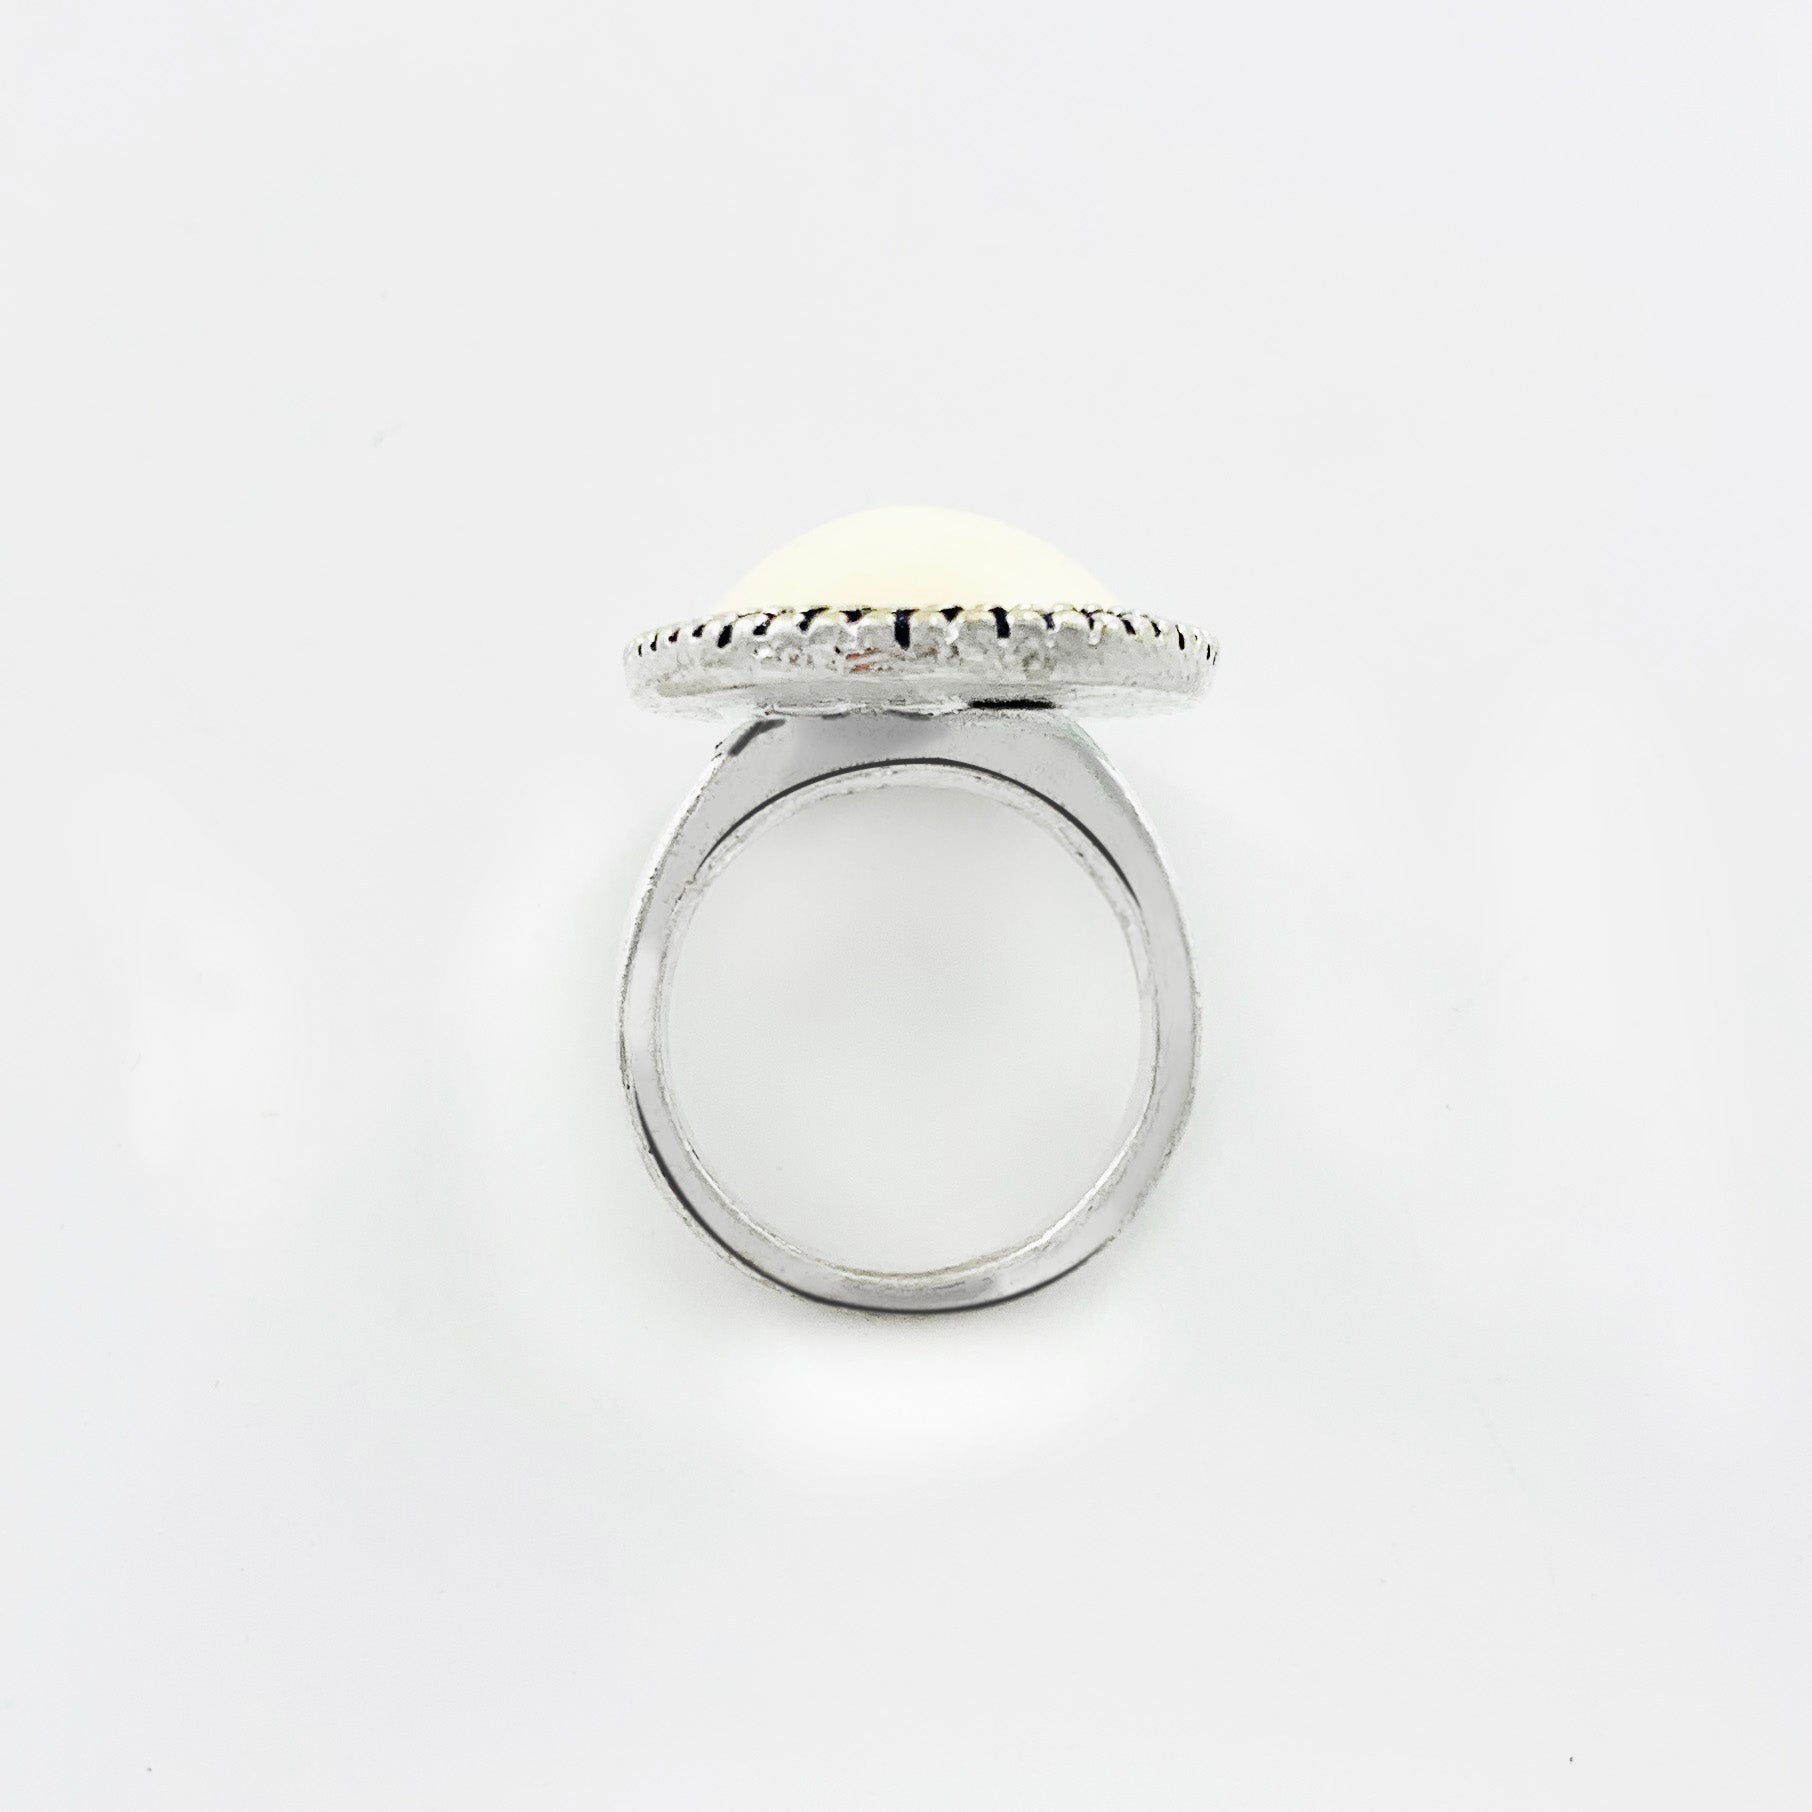 Silver ring with large ivory-coloured stone